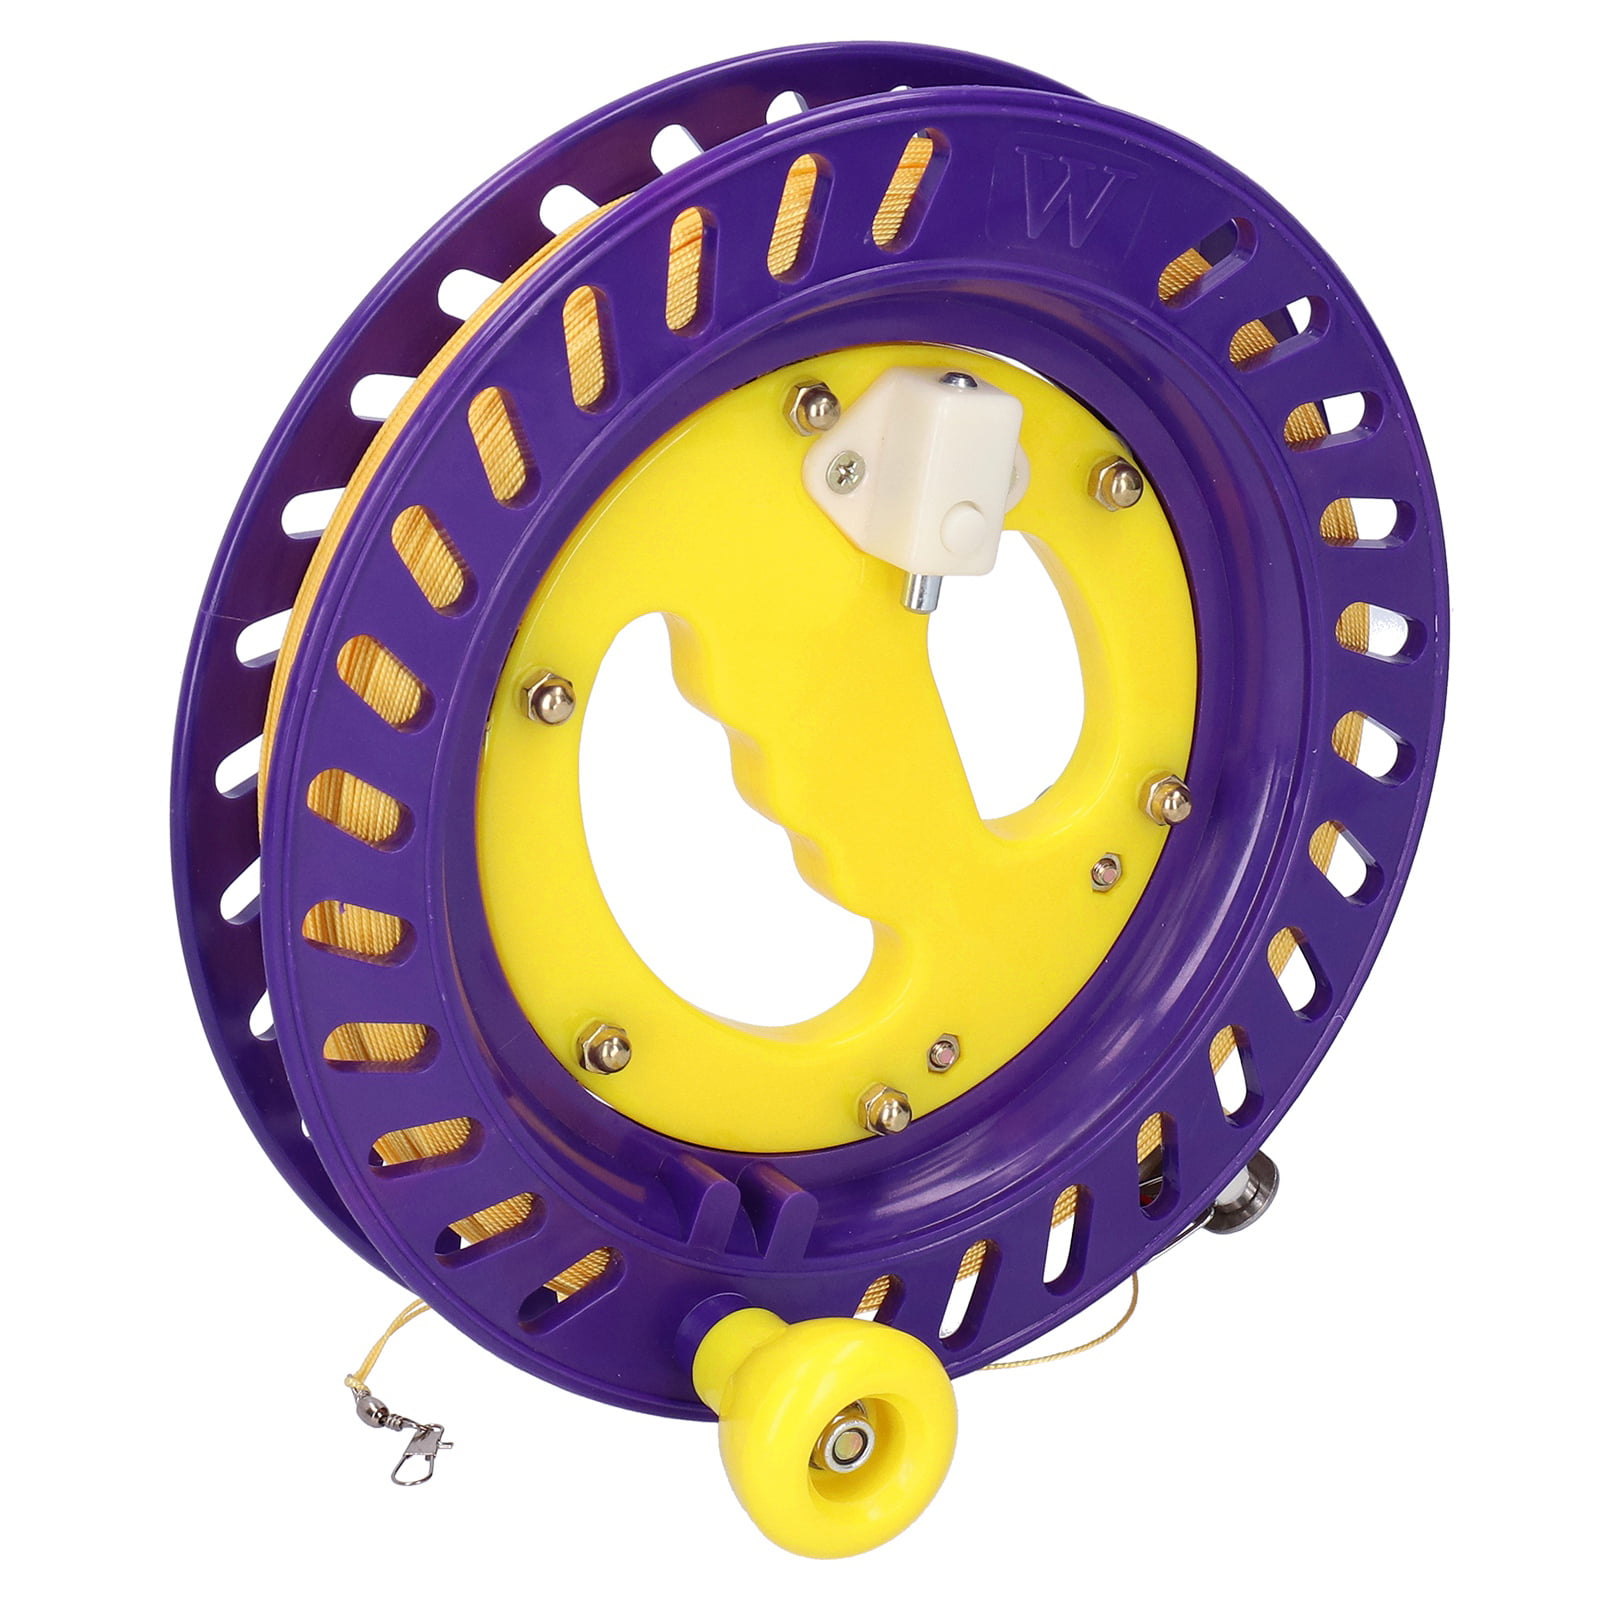 8.7" Kite Winder Reel Line Set Control Freely with Brake for Adults Outdoors Fun 